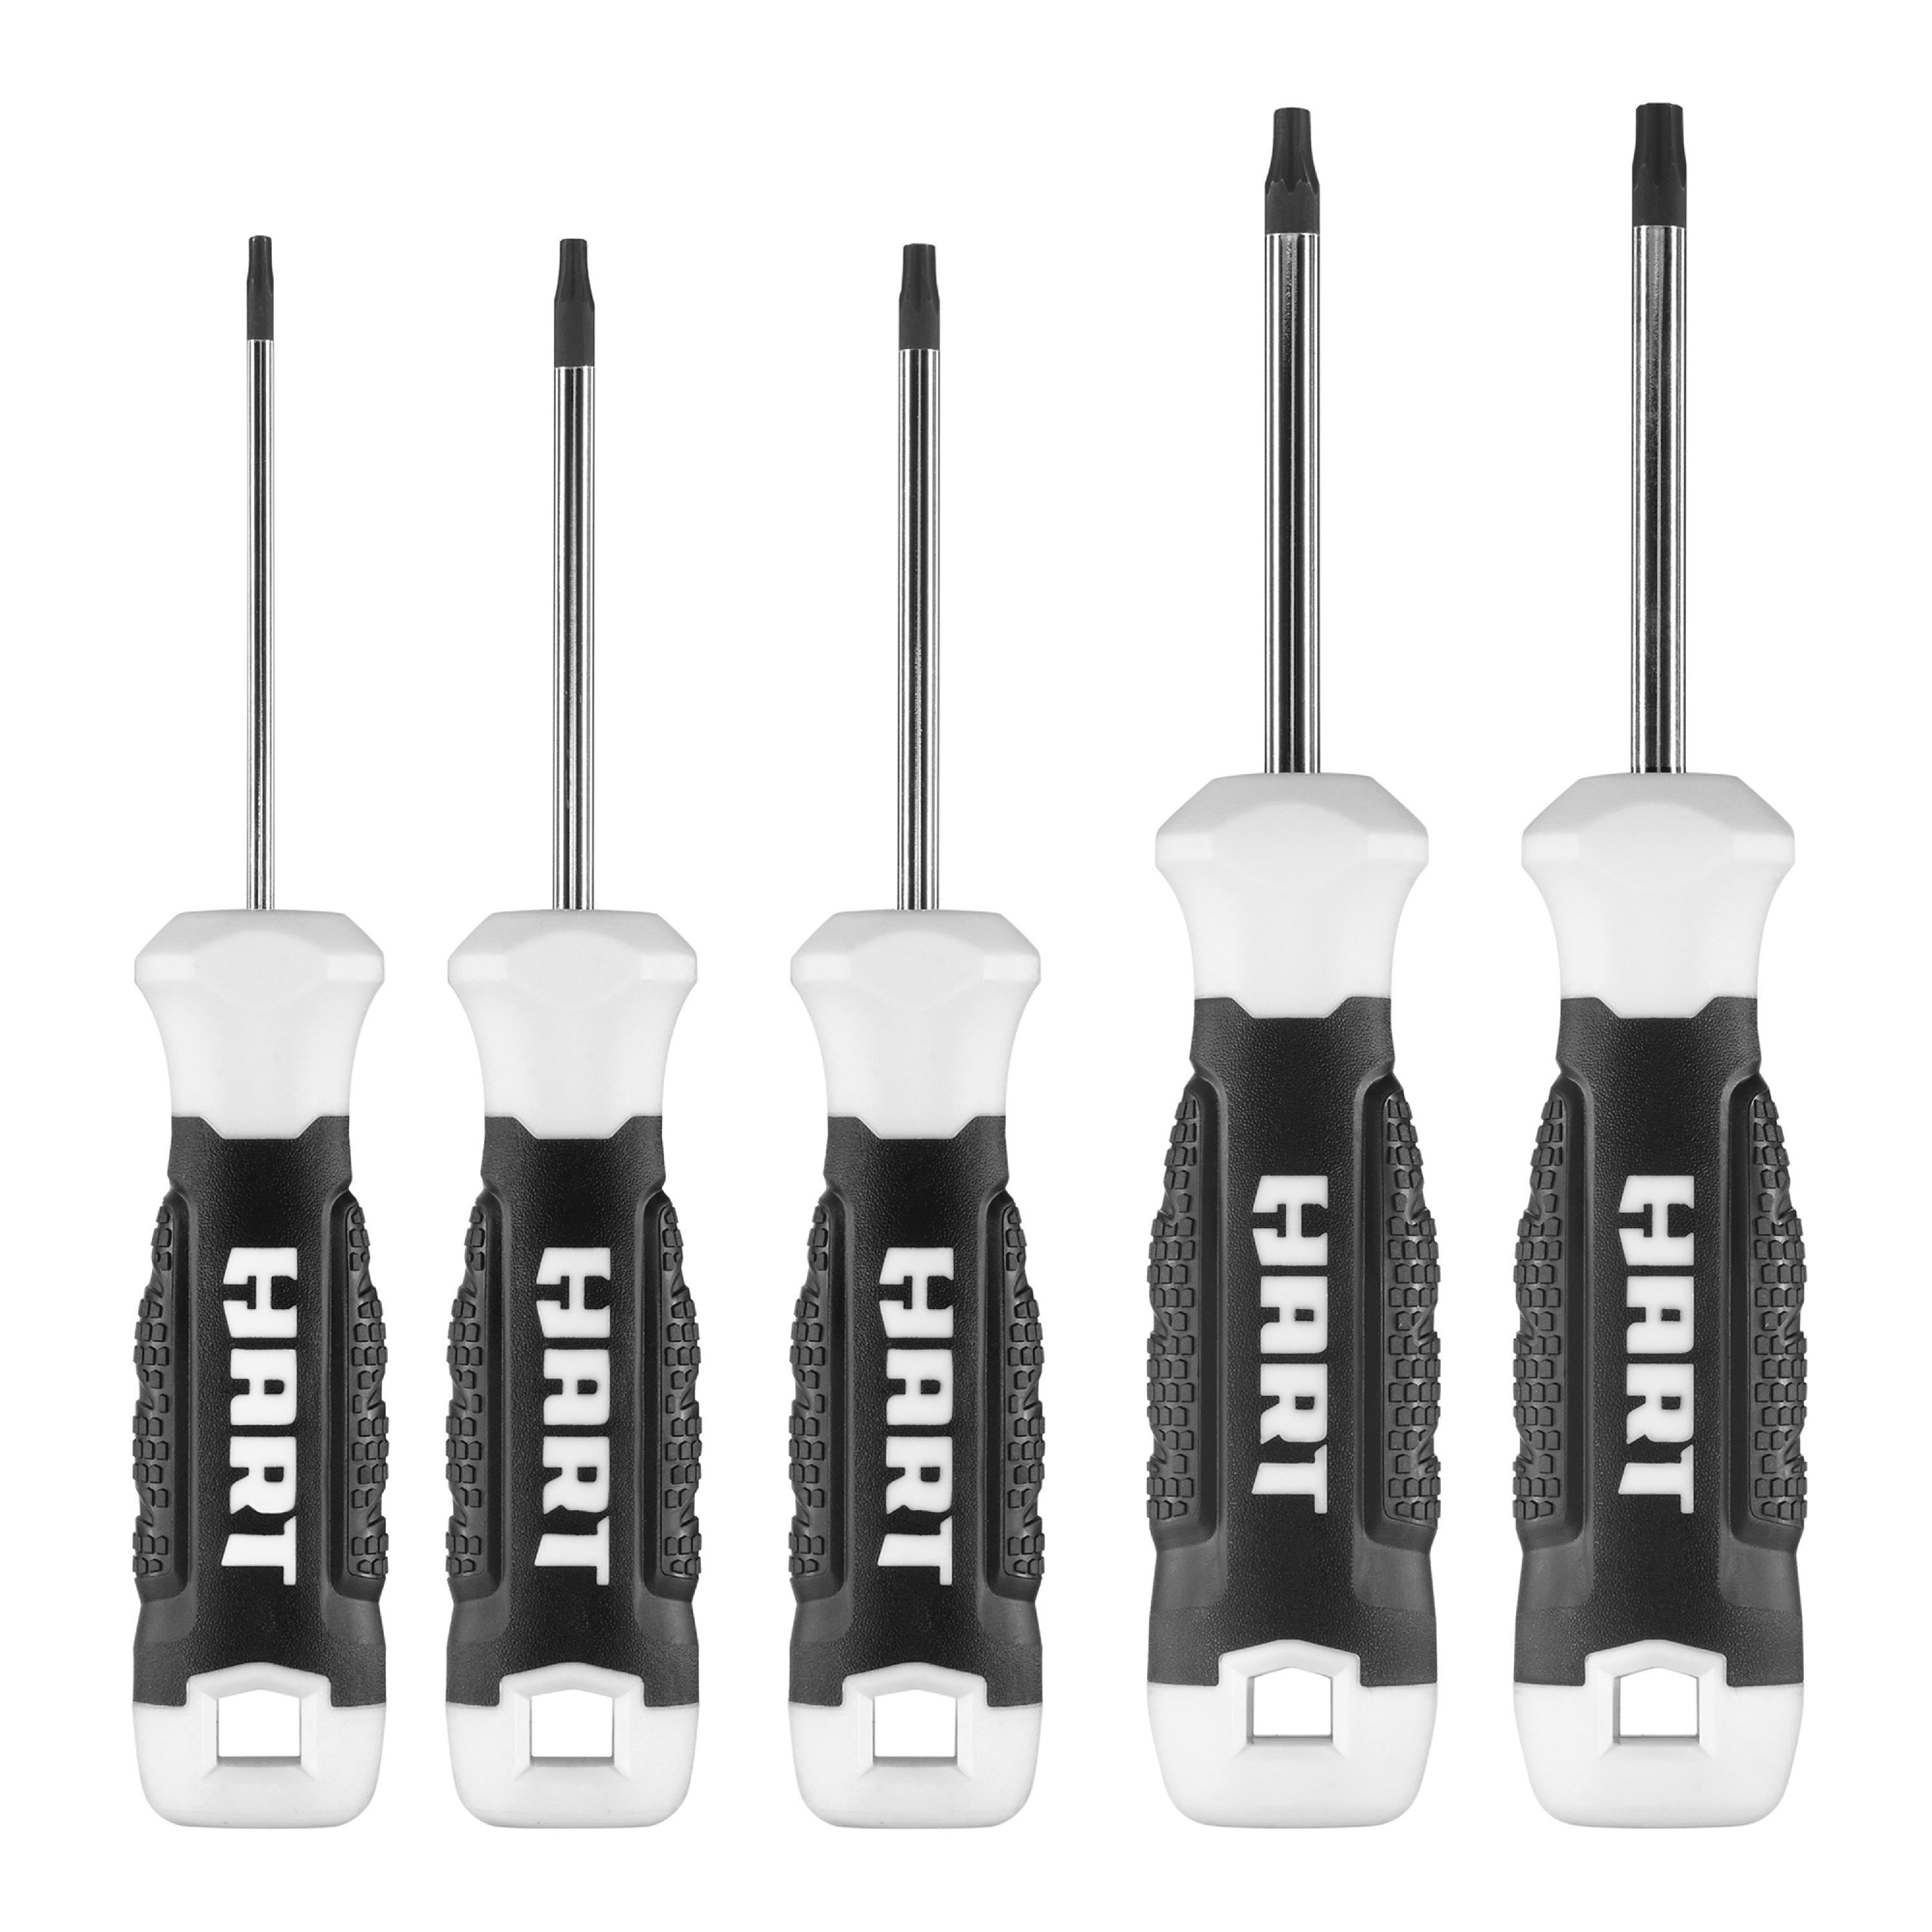 Details about   HART 6pc Screwdriver Set With Bonus Bottle Opener Magnetic Tips Free Shipping 